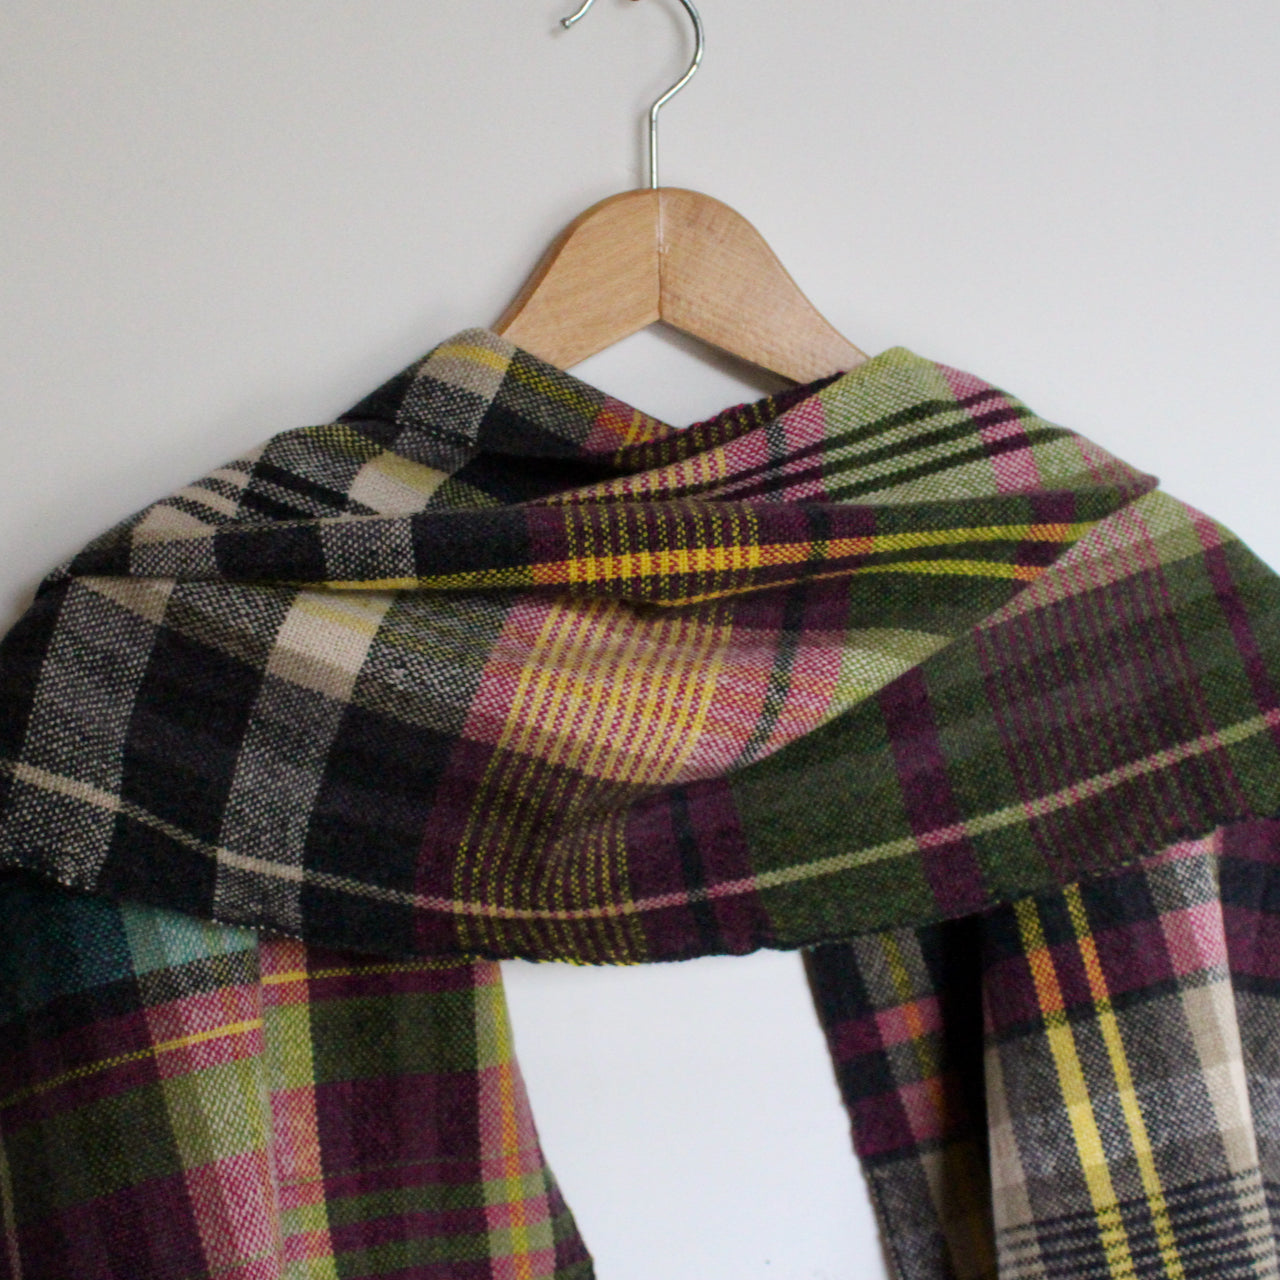 handwoven woollen scarf by Teresa Dunne Cornish textile artist in pink, green, purple and black 